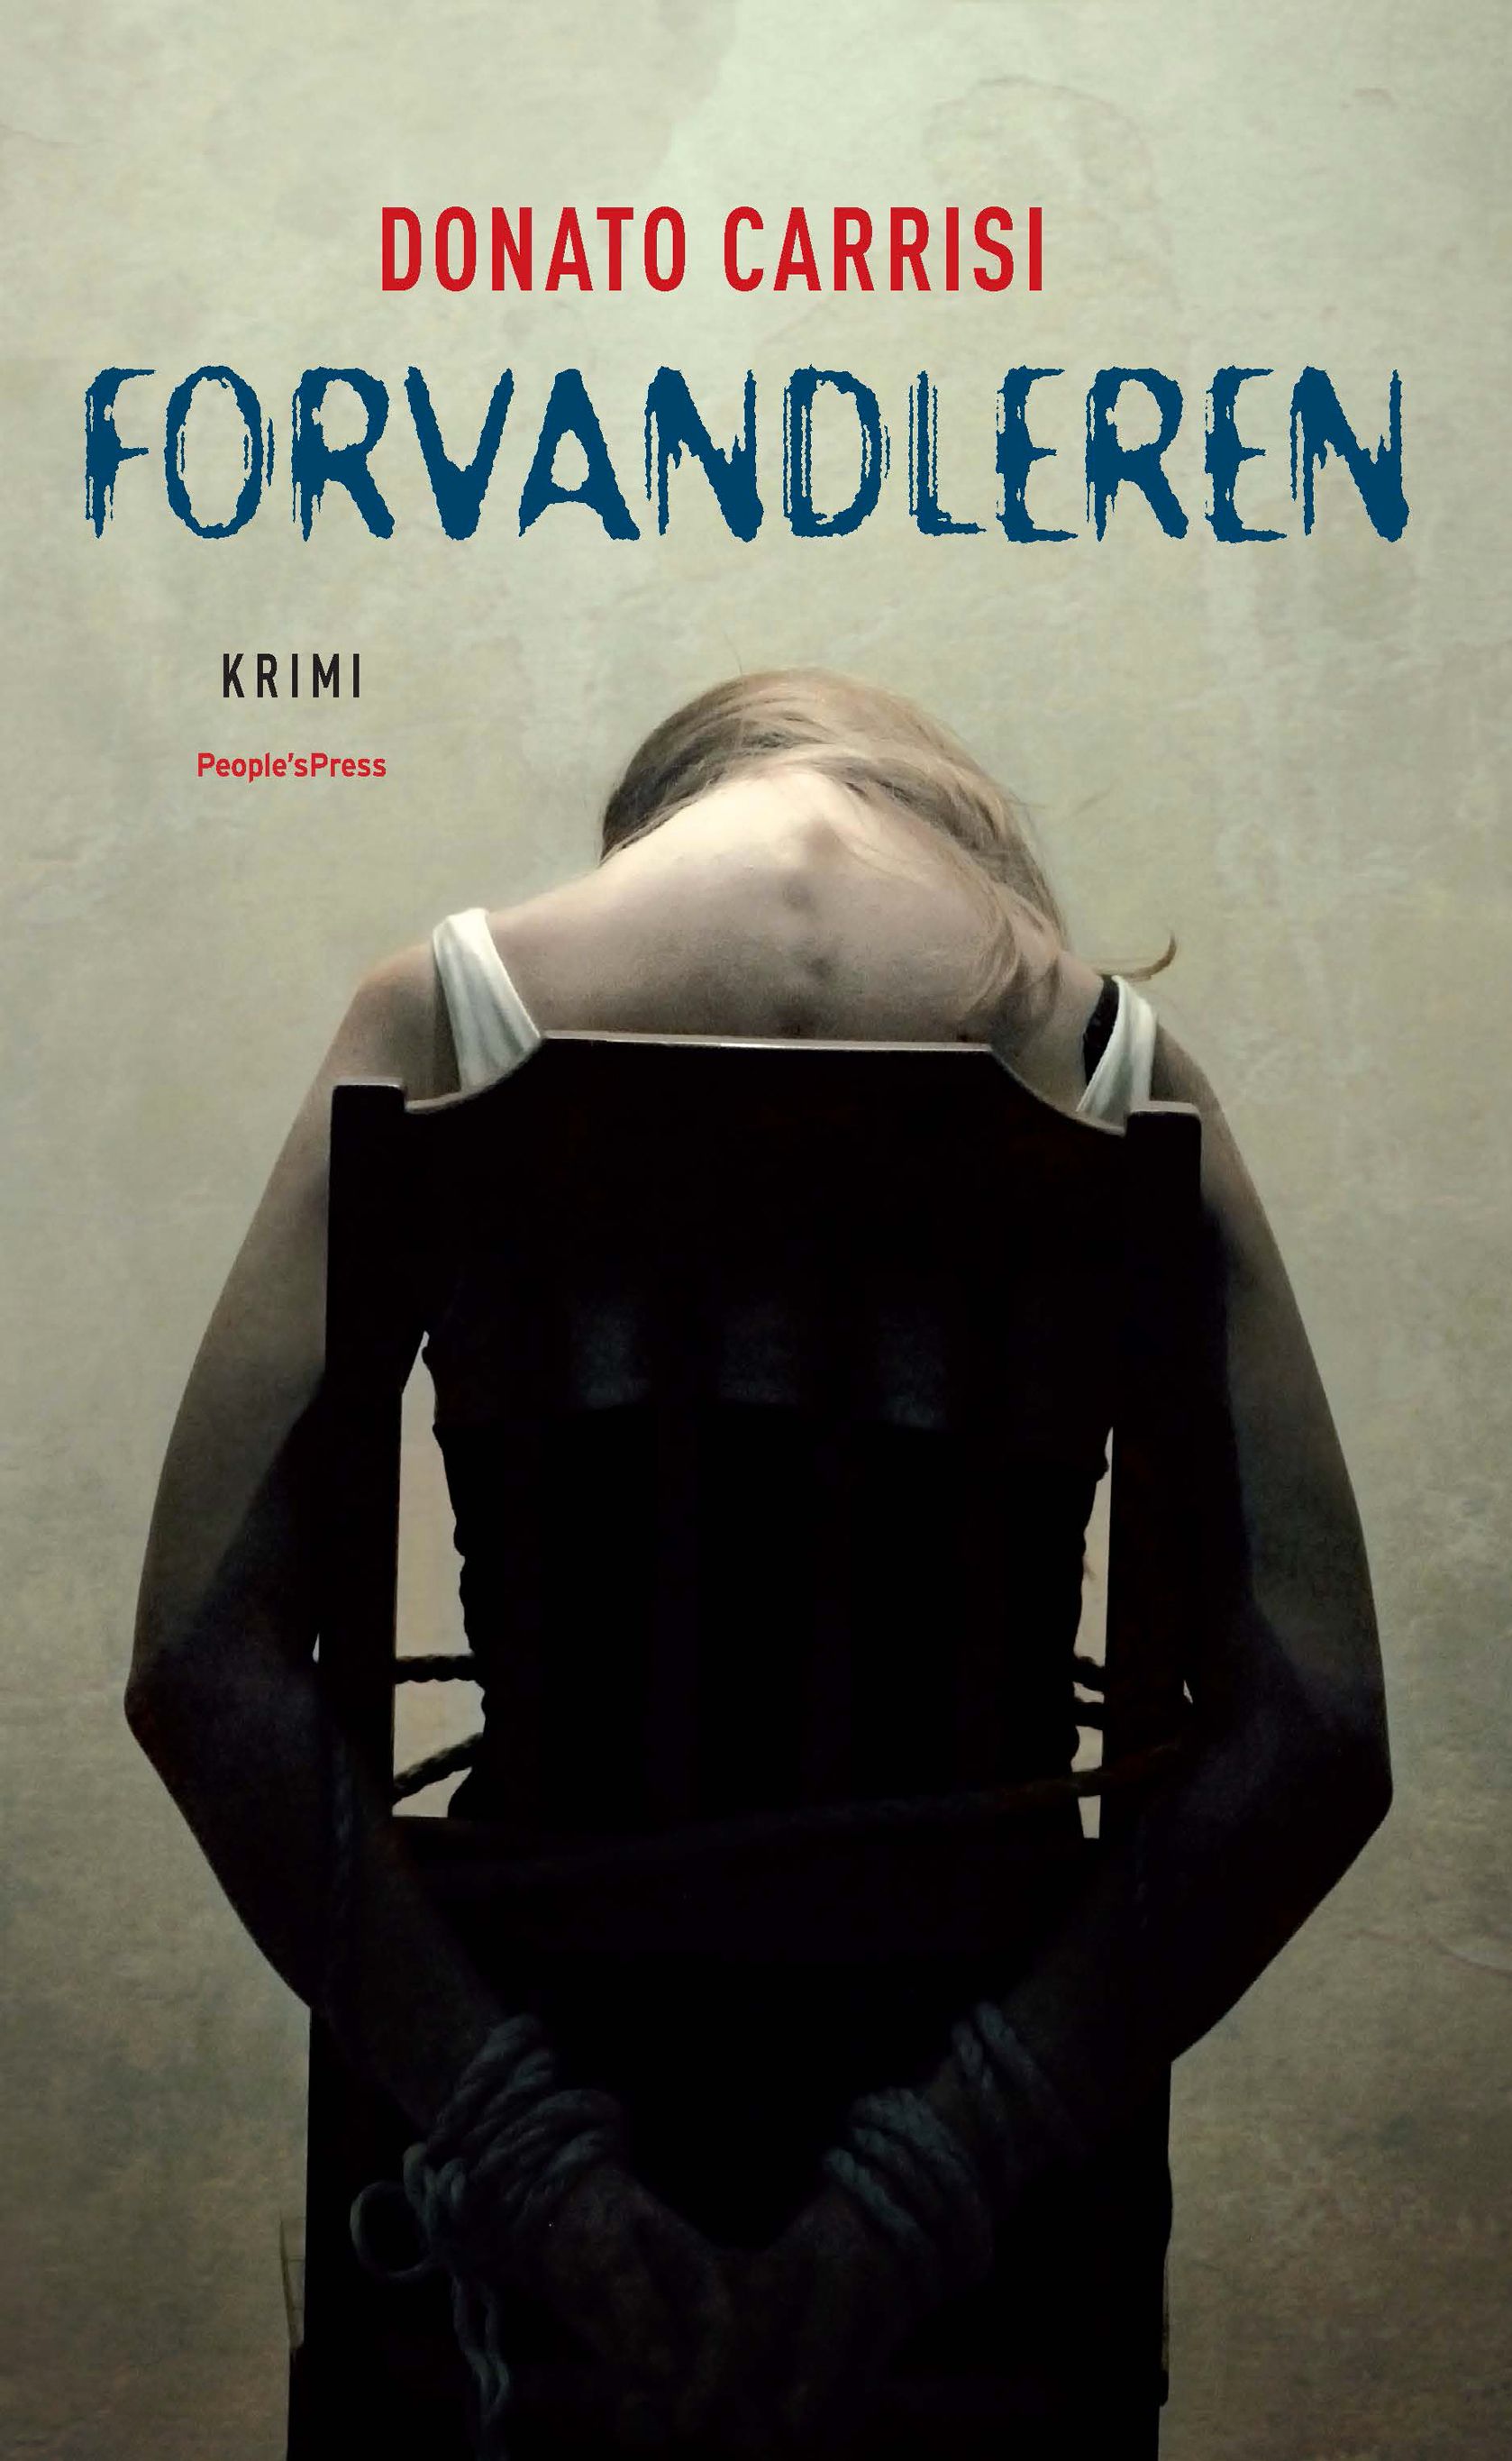 Forvandleren, eBook by Donato Carrisi